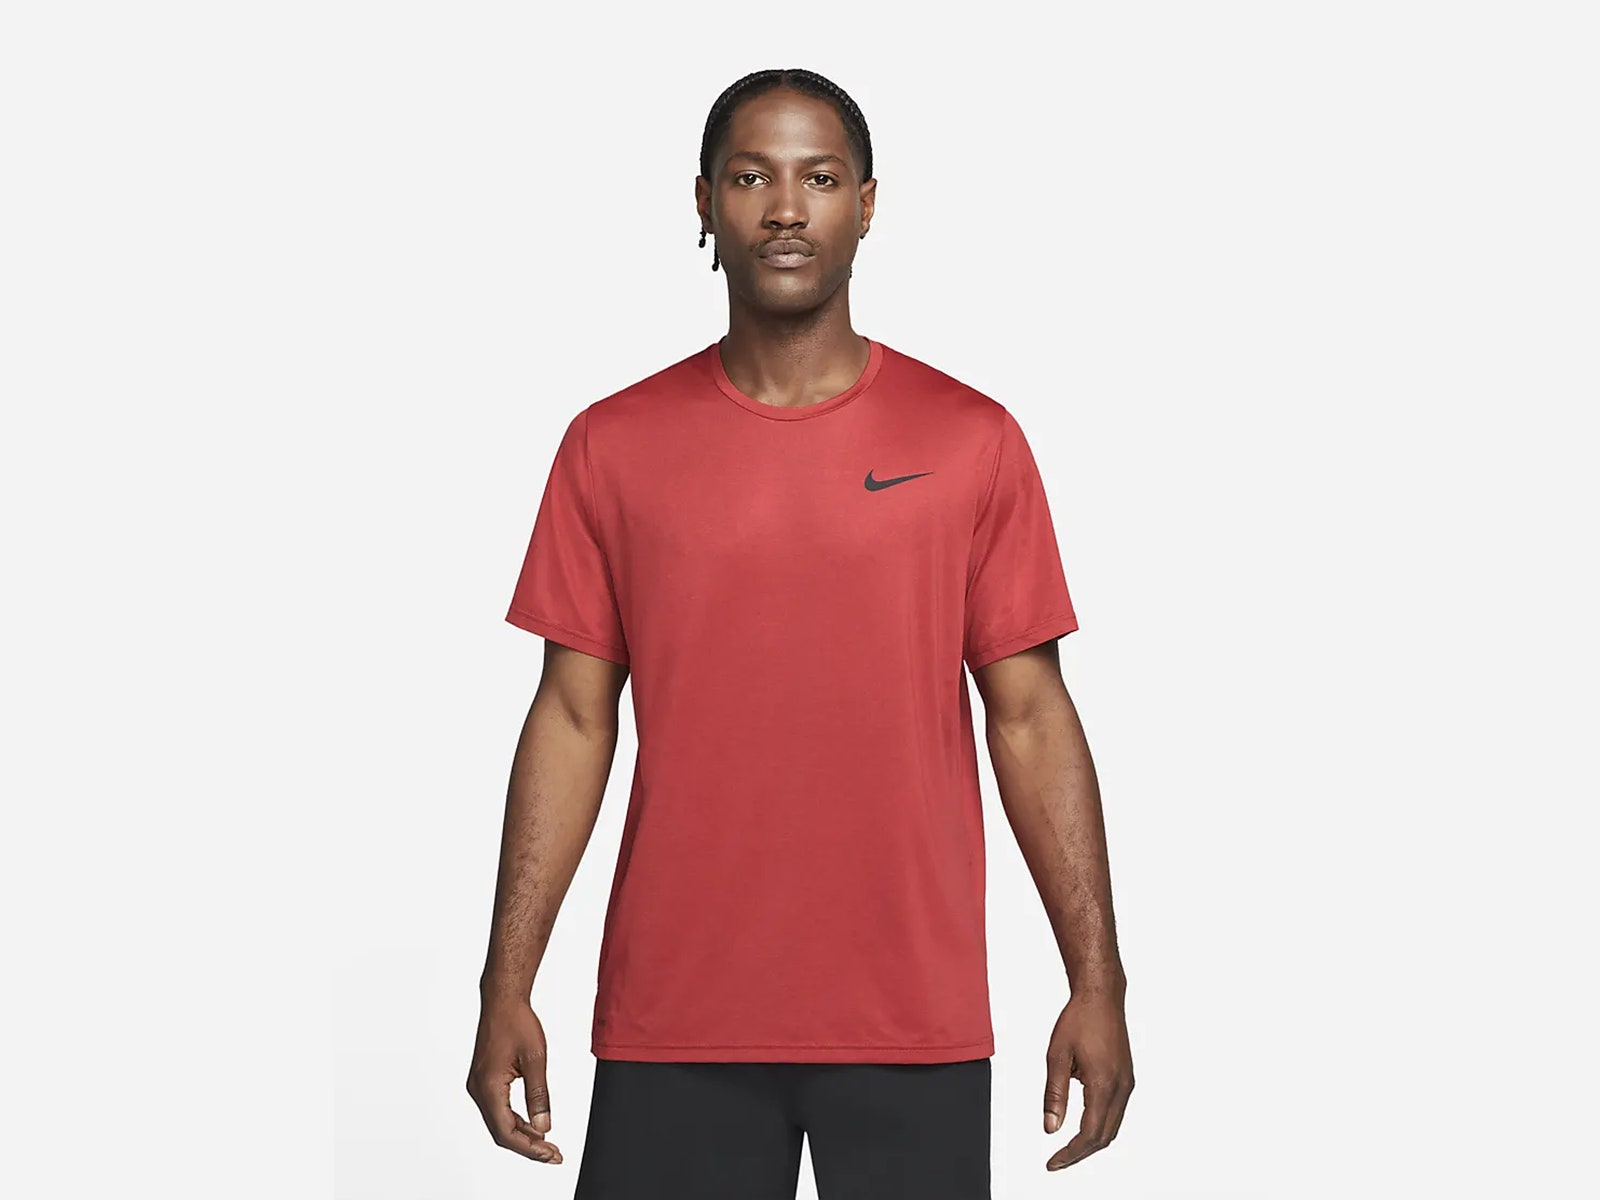 Person modeling a Nike Pro Dri Fit Short Sleeve Jersey